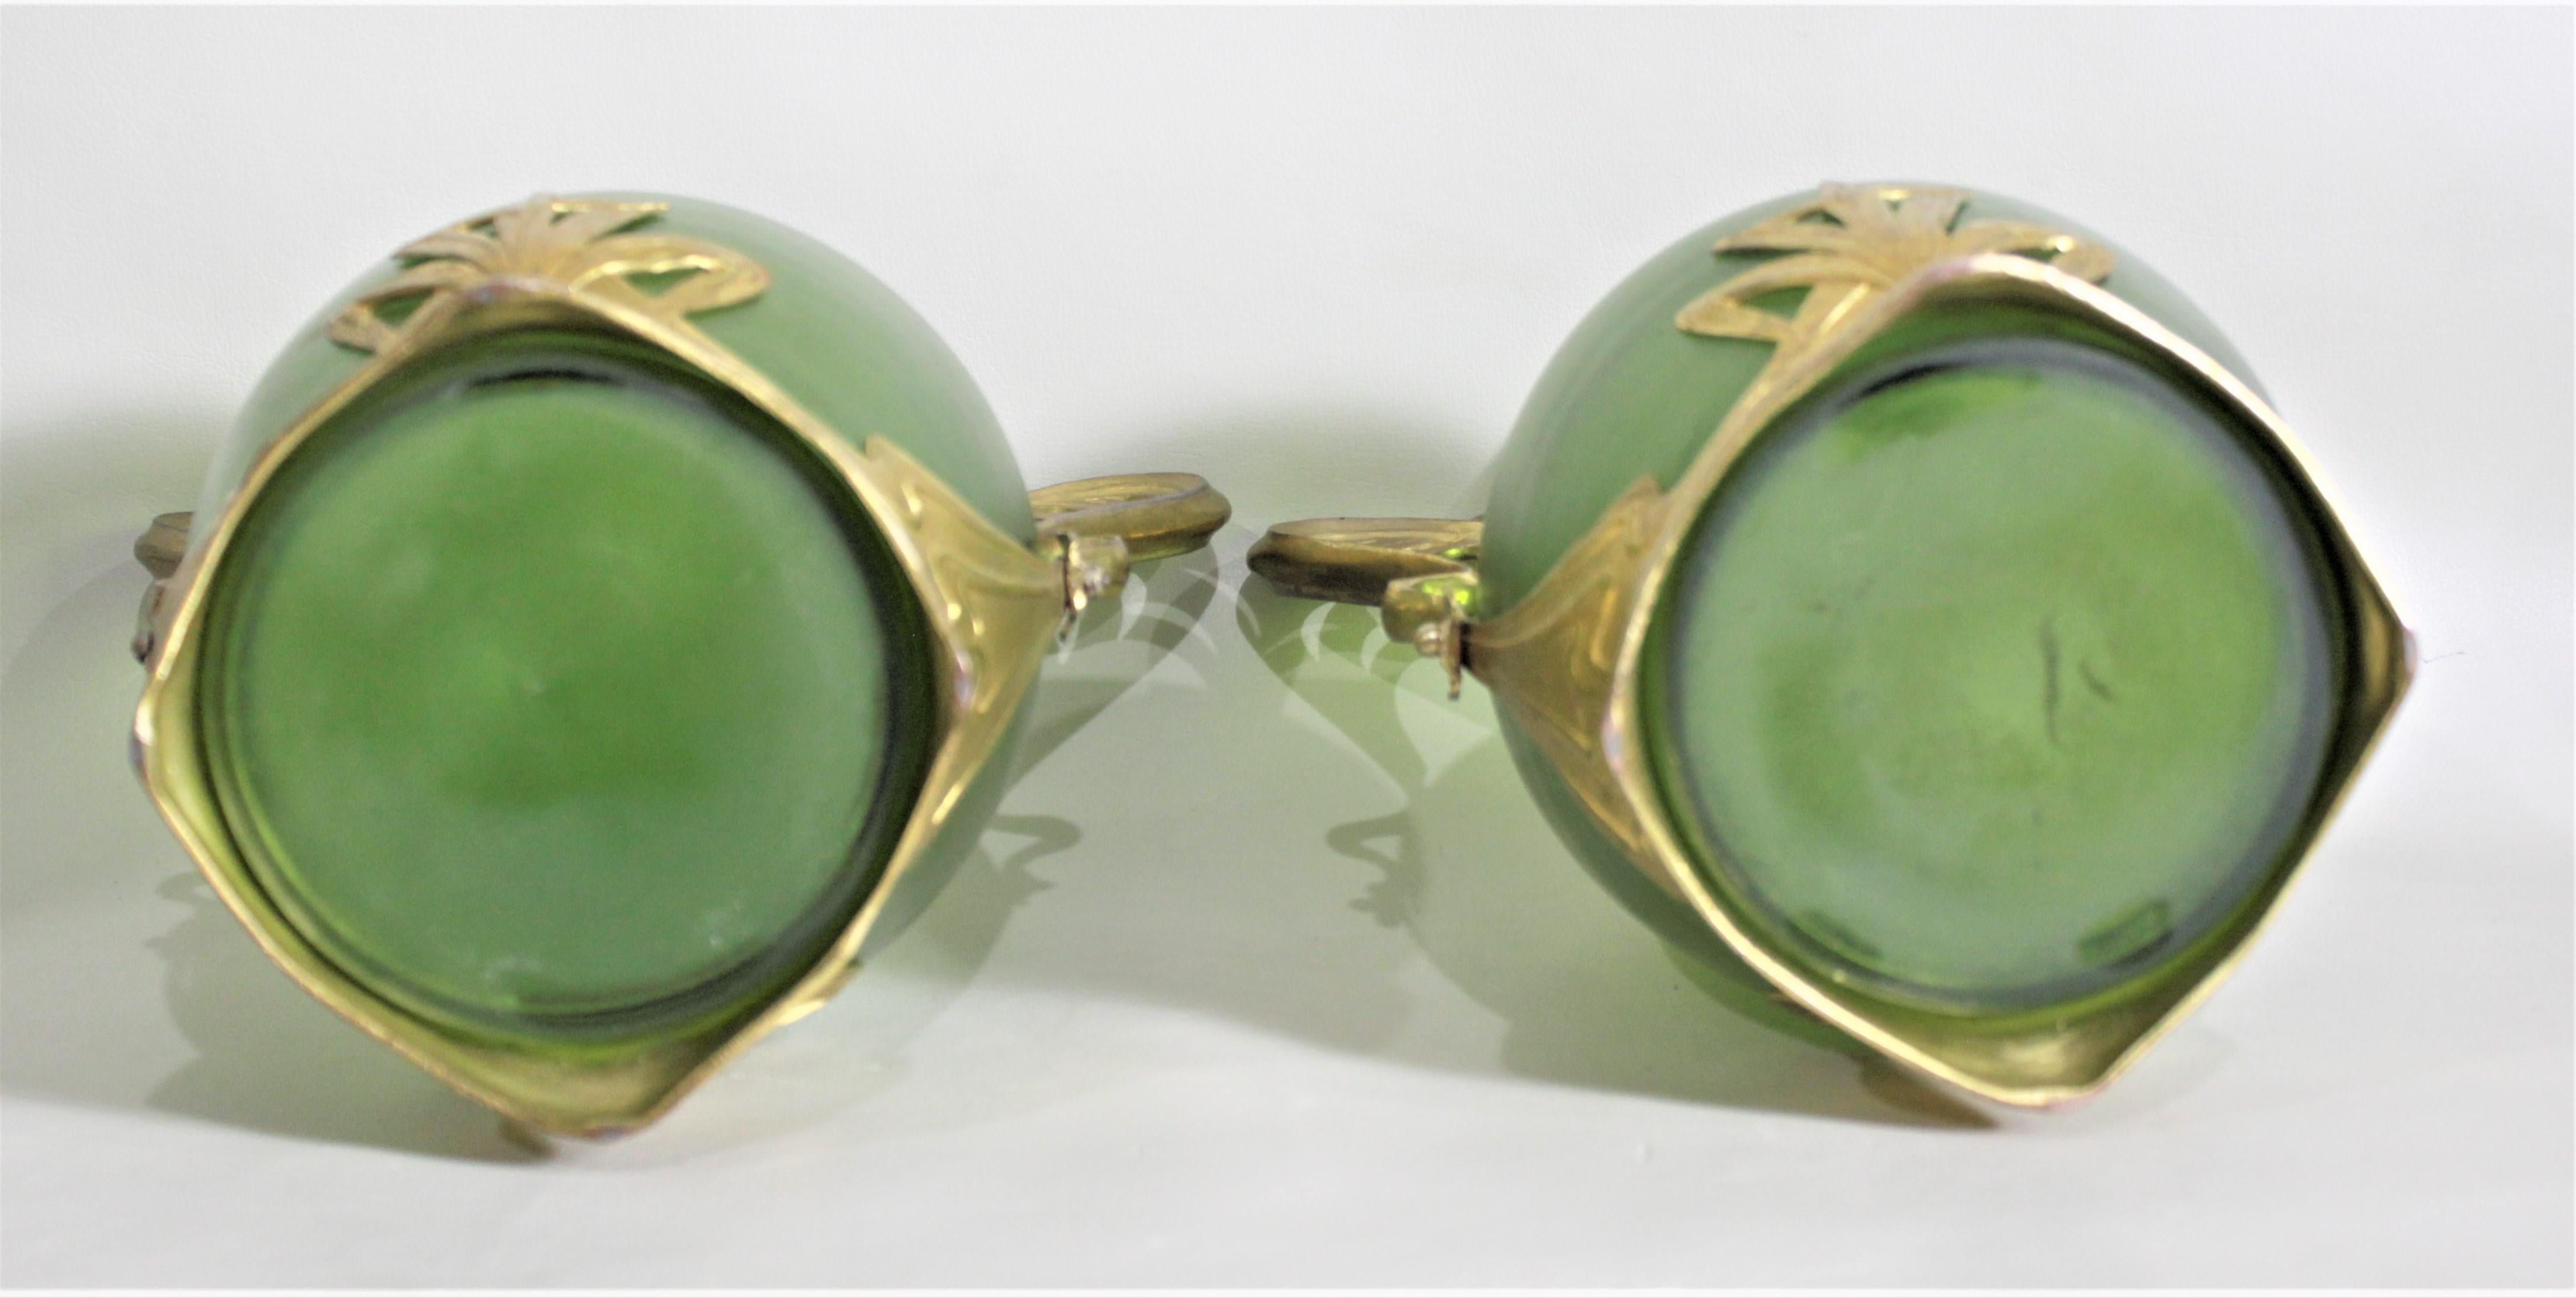 Pair of Antique Art Nouveau Green Austrian Vases with Gilt Metal Mounts In Good Condition For Sale In Hamilton, Ontario